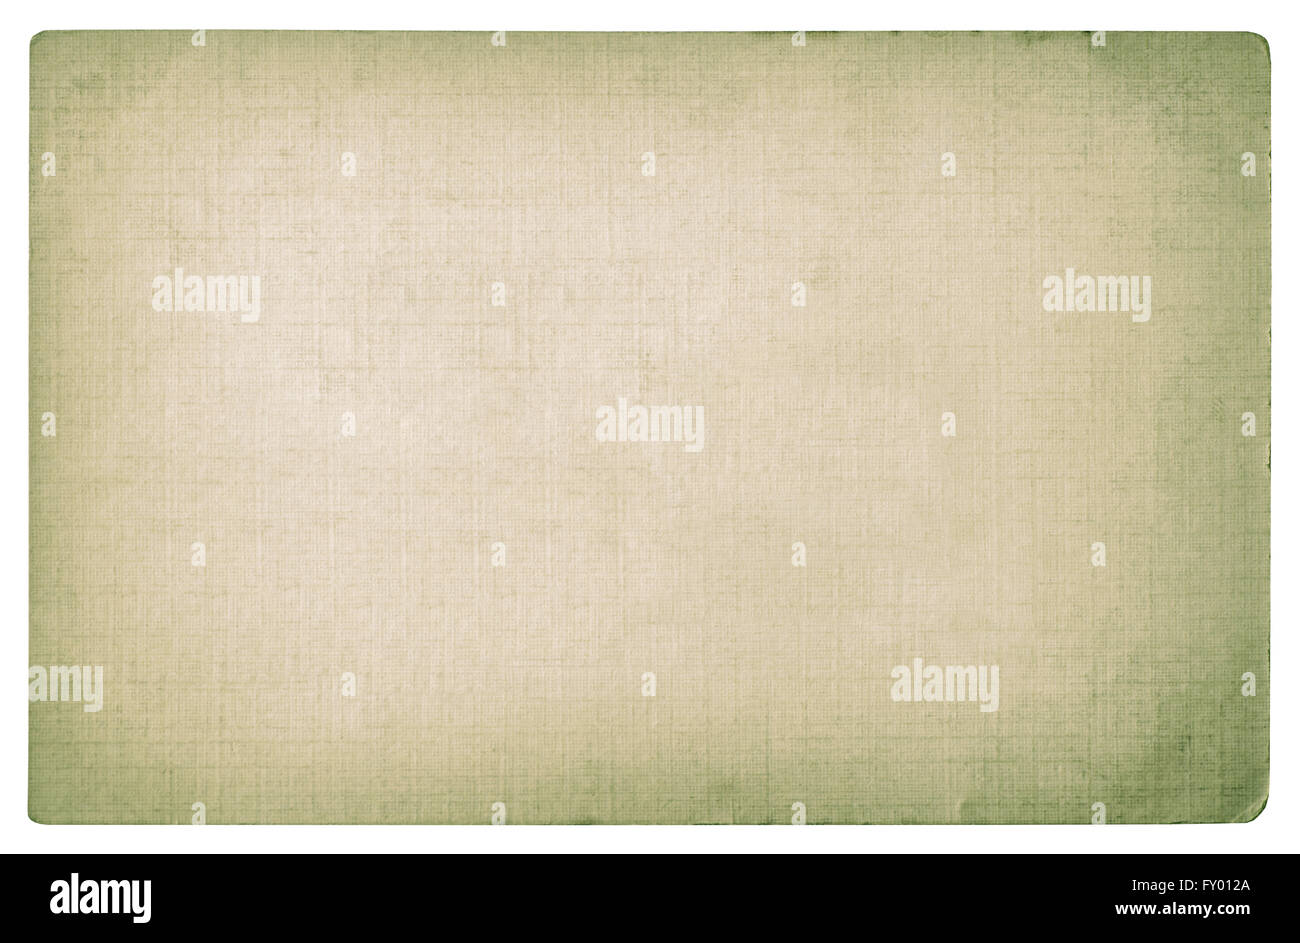 Used stained grungy paper texture. Cardboard with edges retro style toned Stock Photo